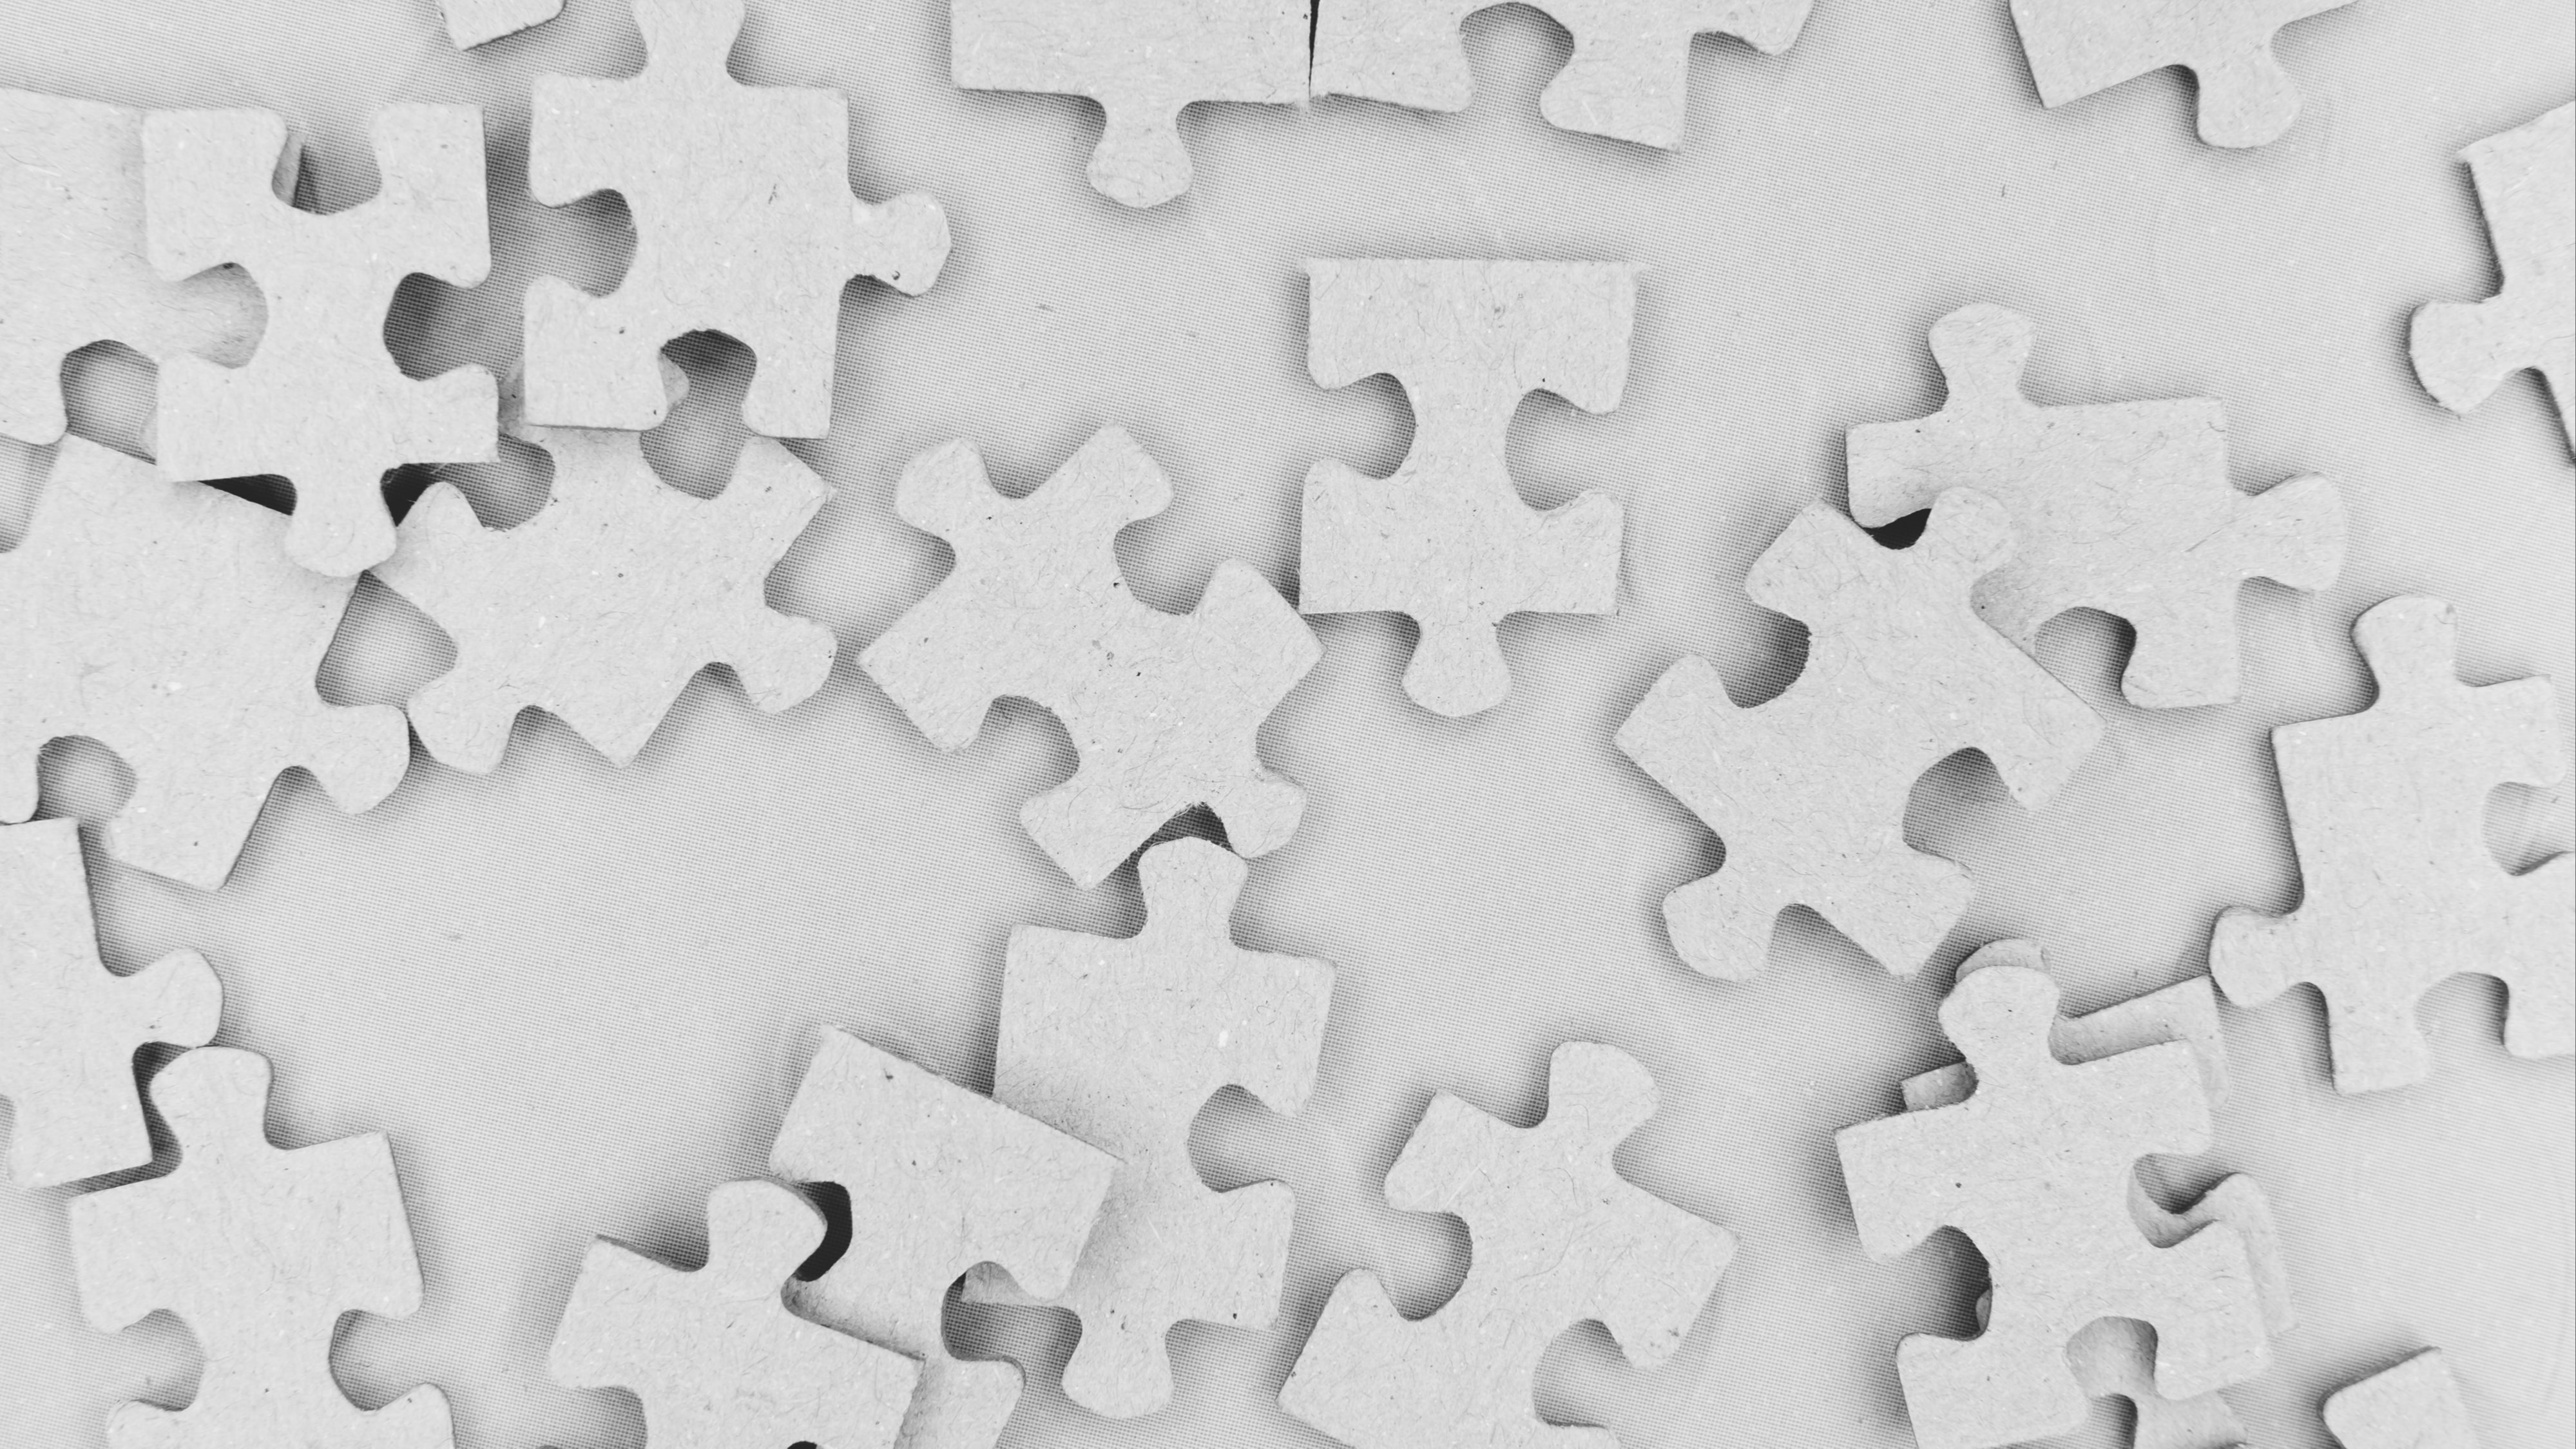 Blank puzzle pieces in a pile.